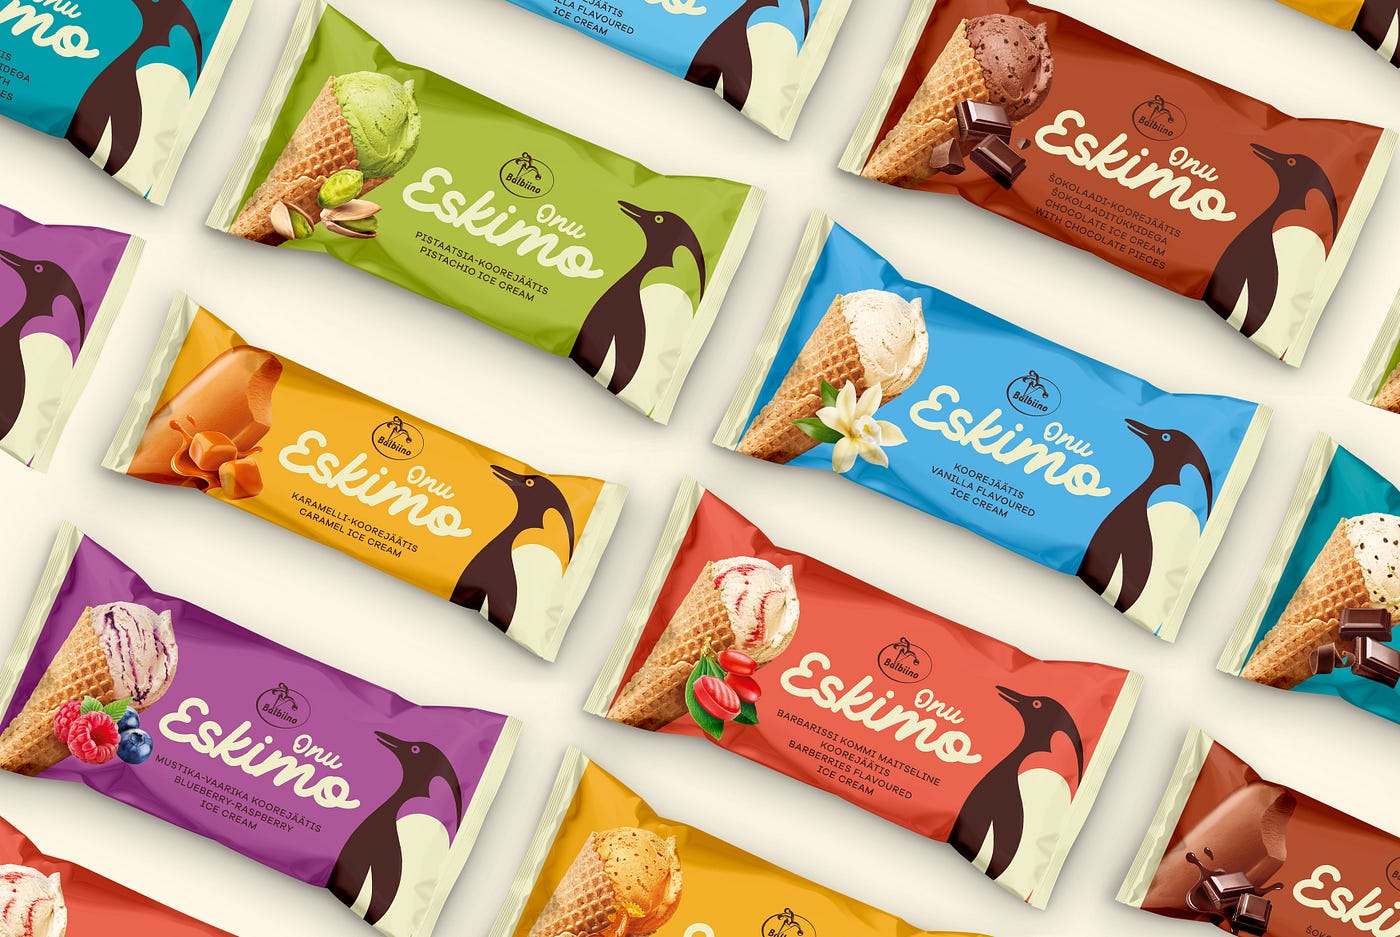 Koor designs the new packaging for Balbiino's complete Onu Eskimo